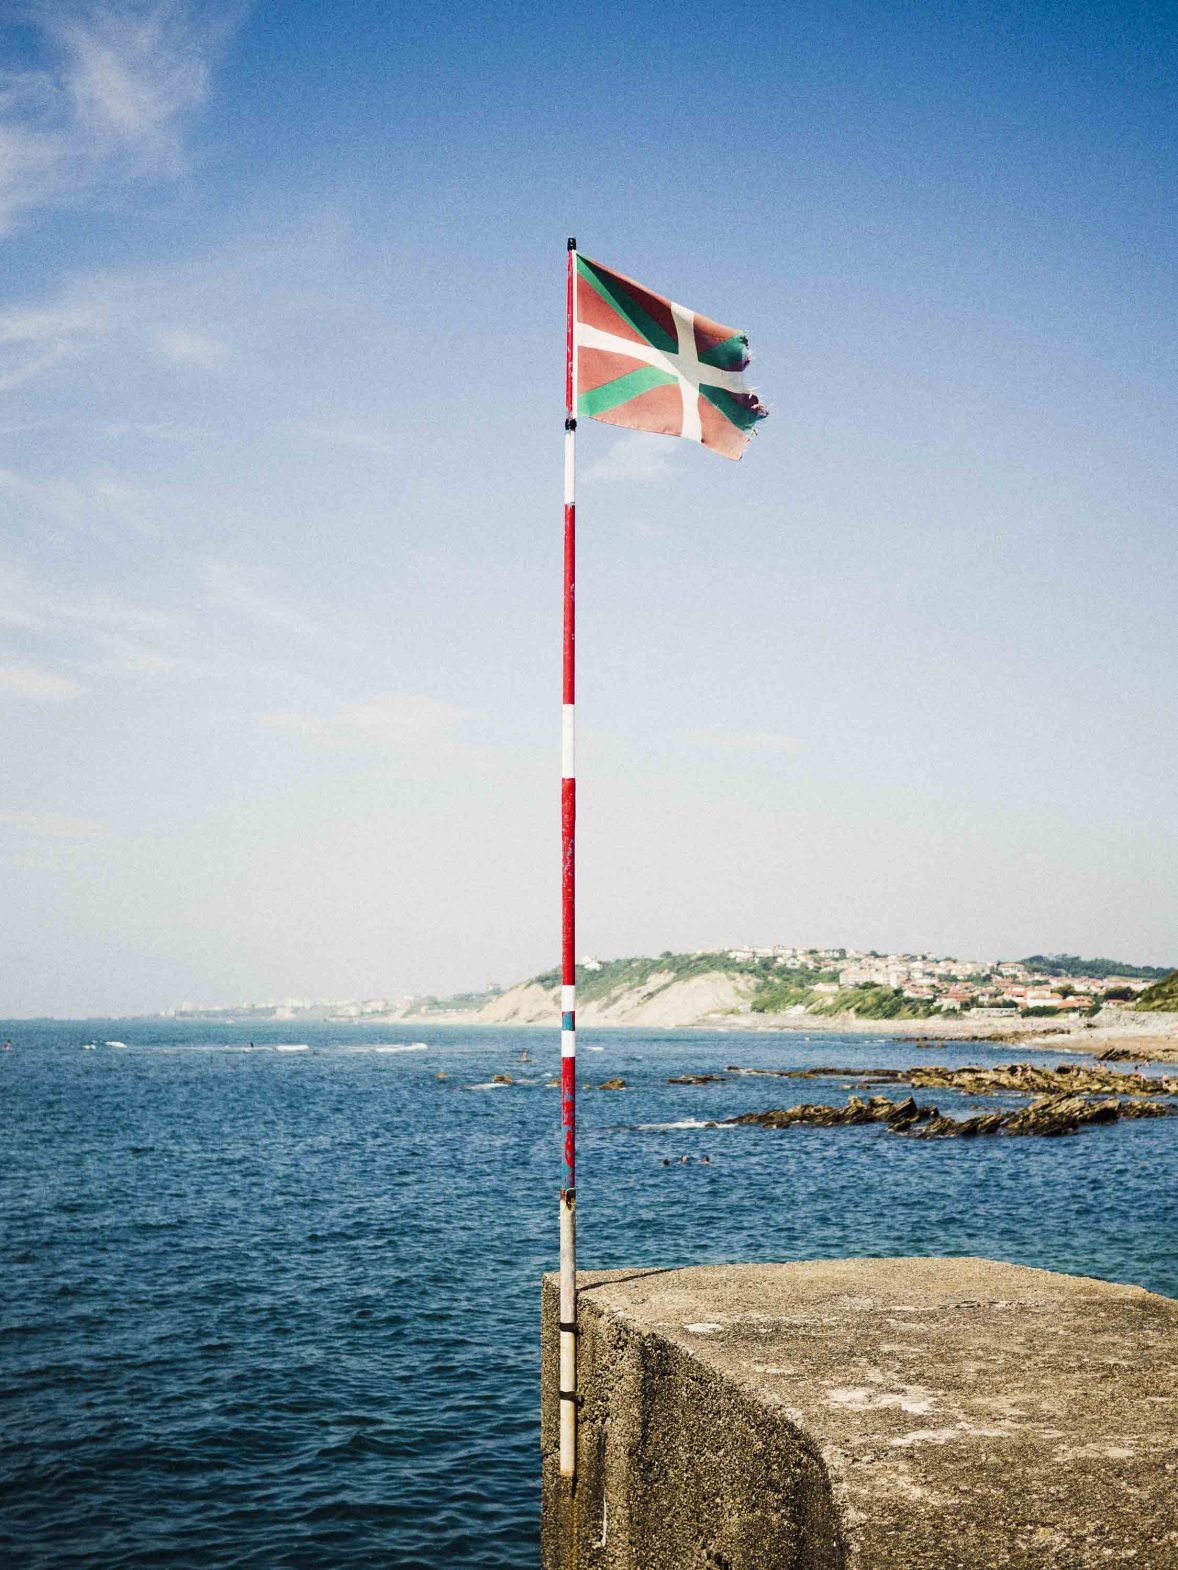 A basque flag by some water.